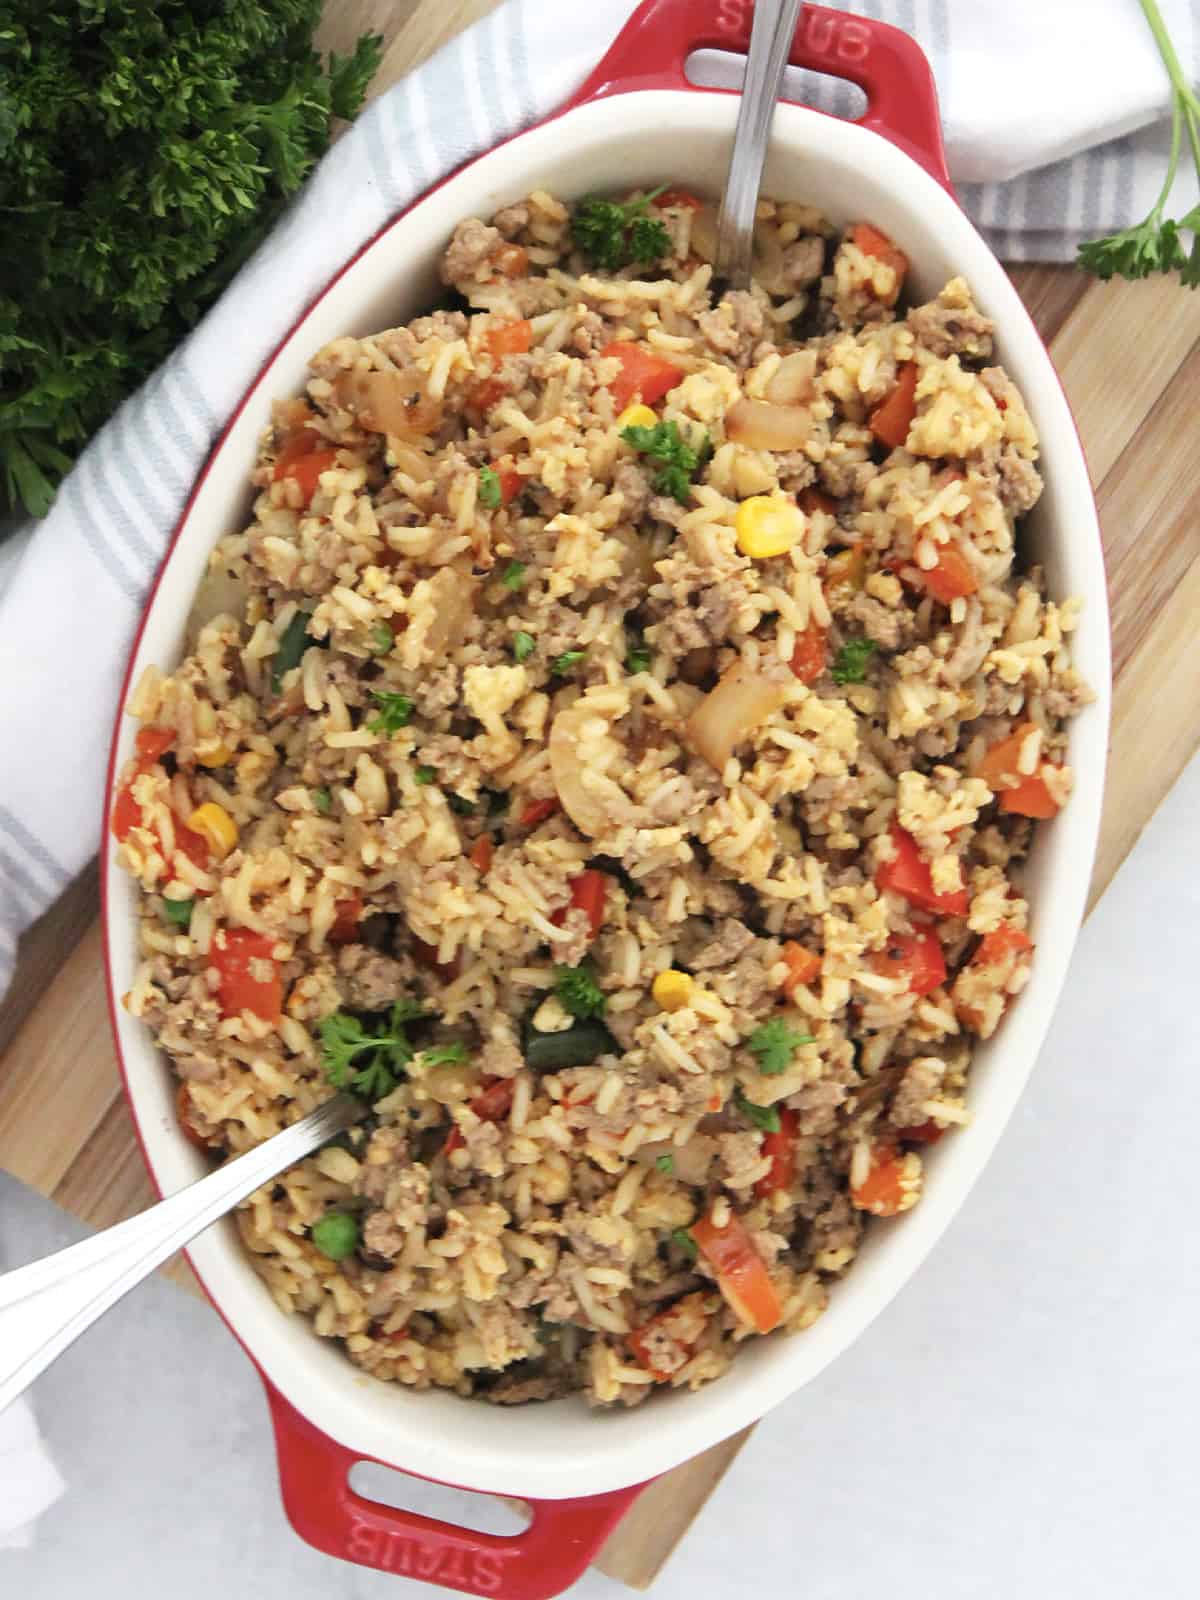 Turkey fried rice served in a red baking dish.